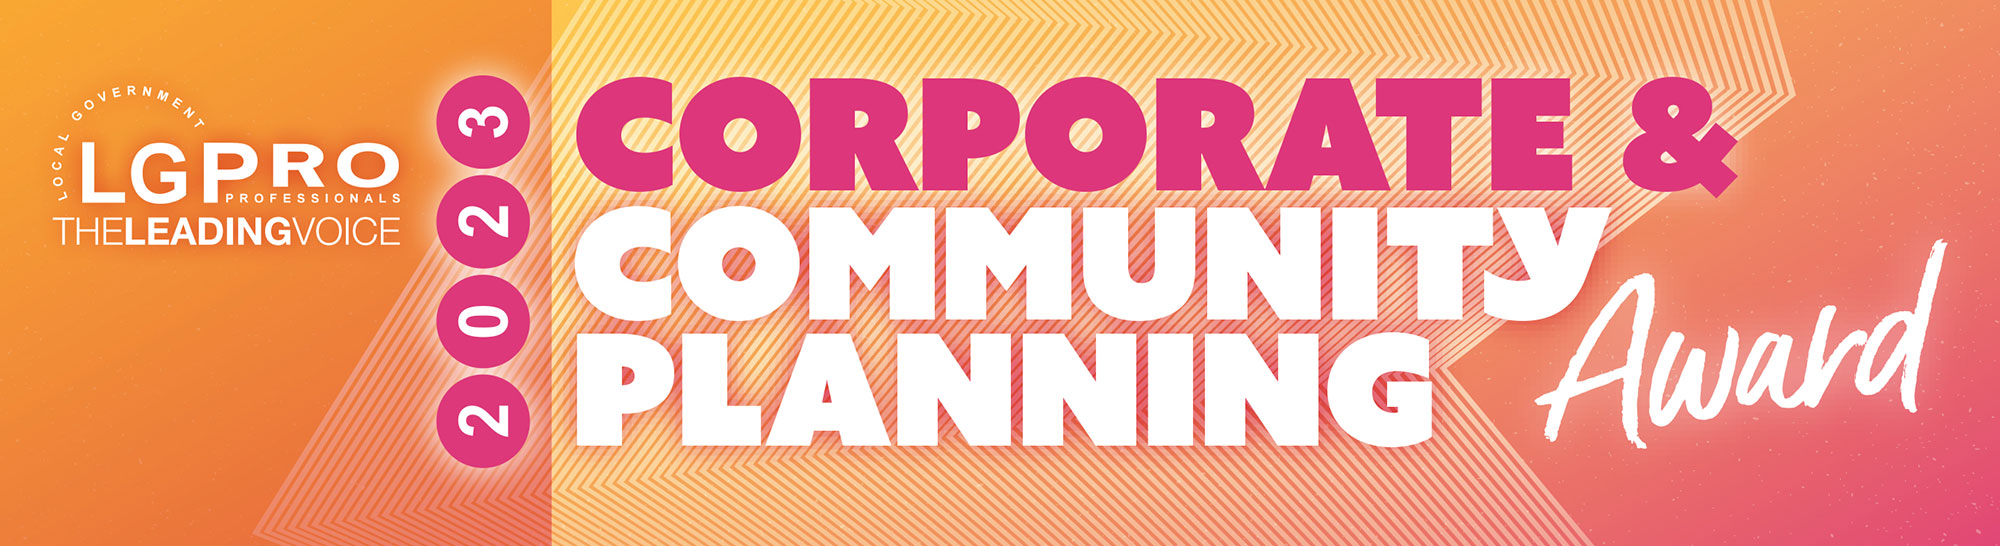 Corporate and Community Planning Award